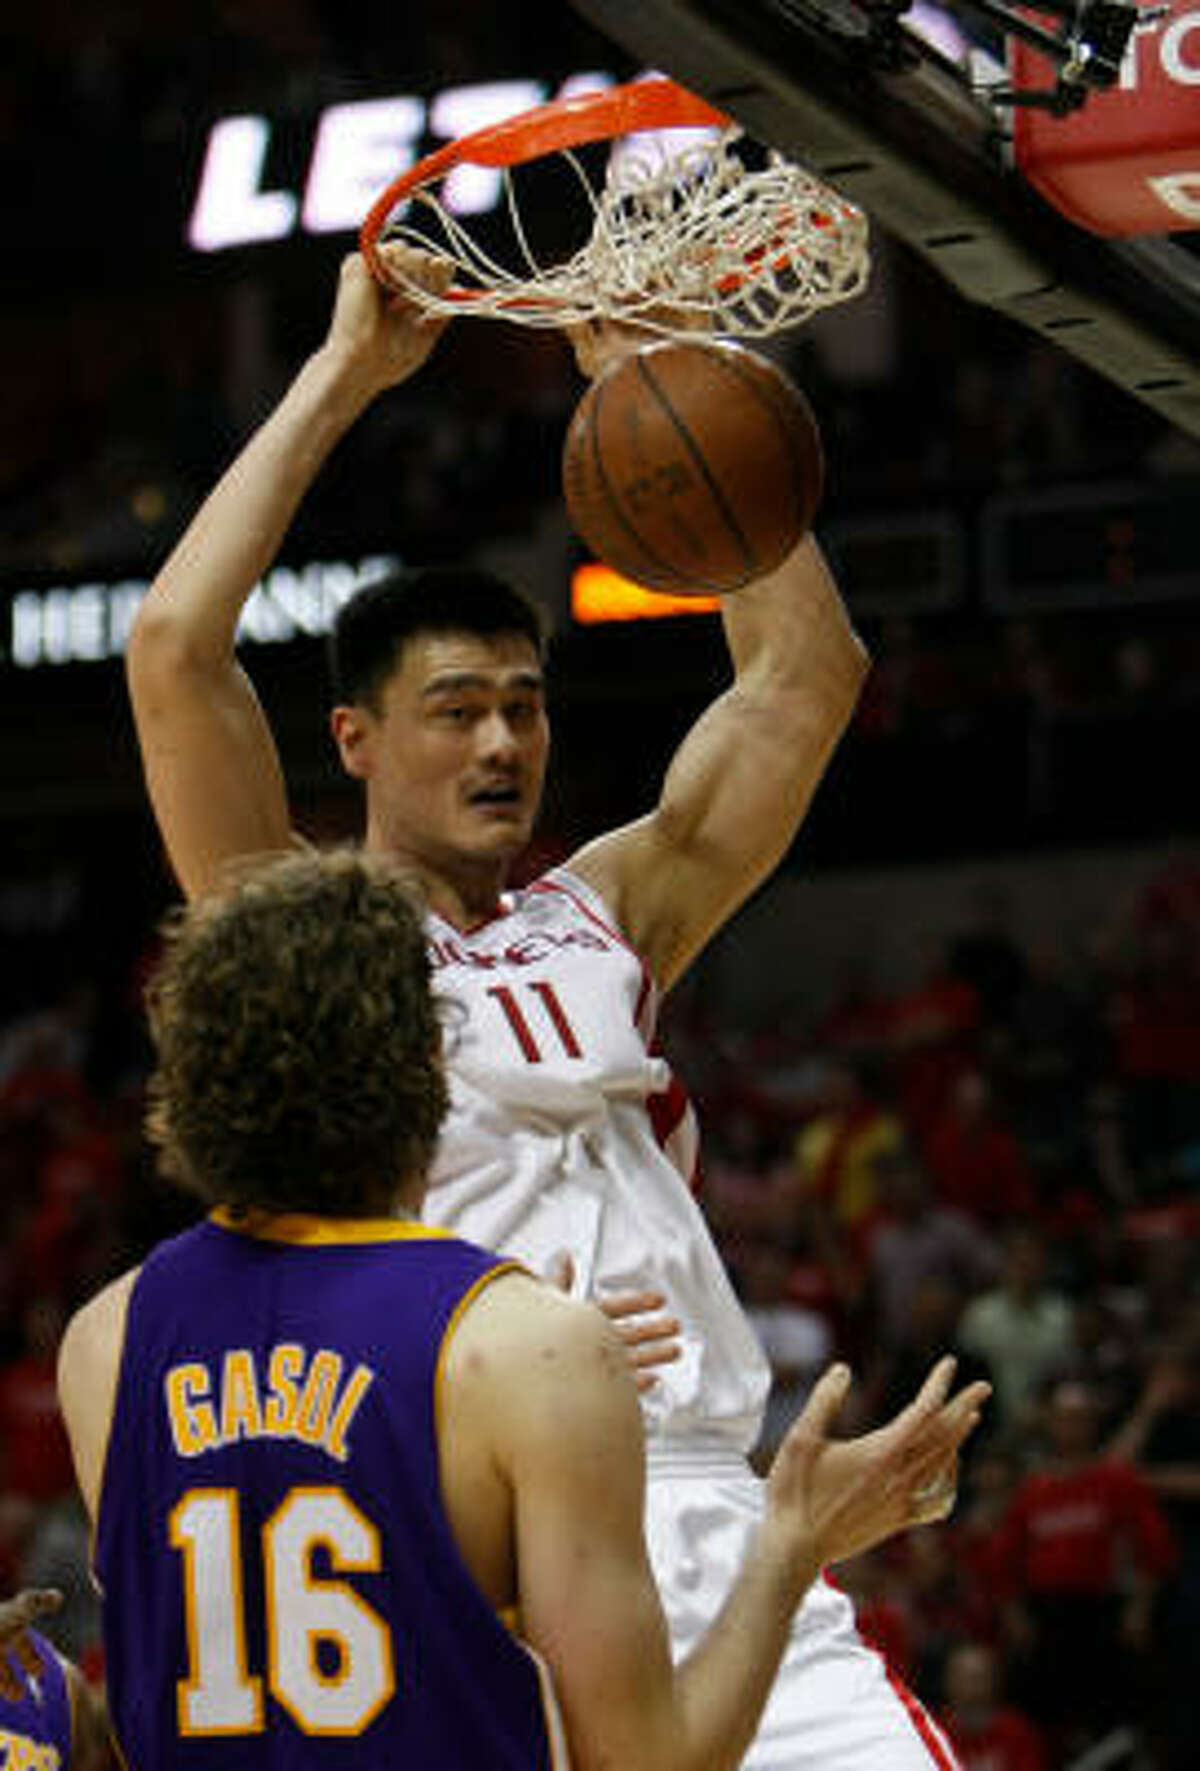 If Yao Ming does not enter free agency, he will earn $17.7 million next season in the final year of his contract.